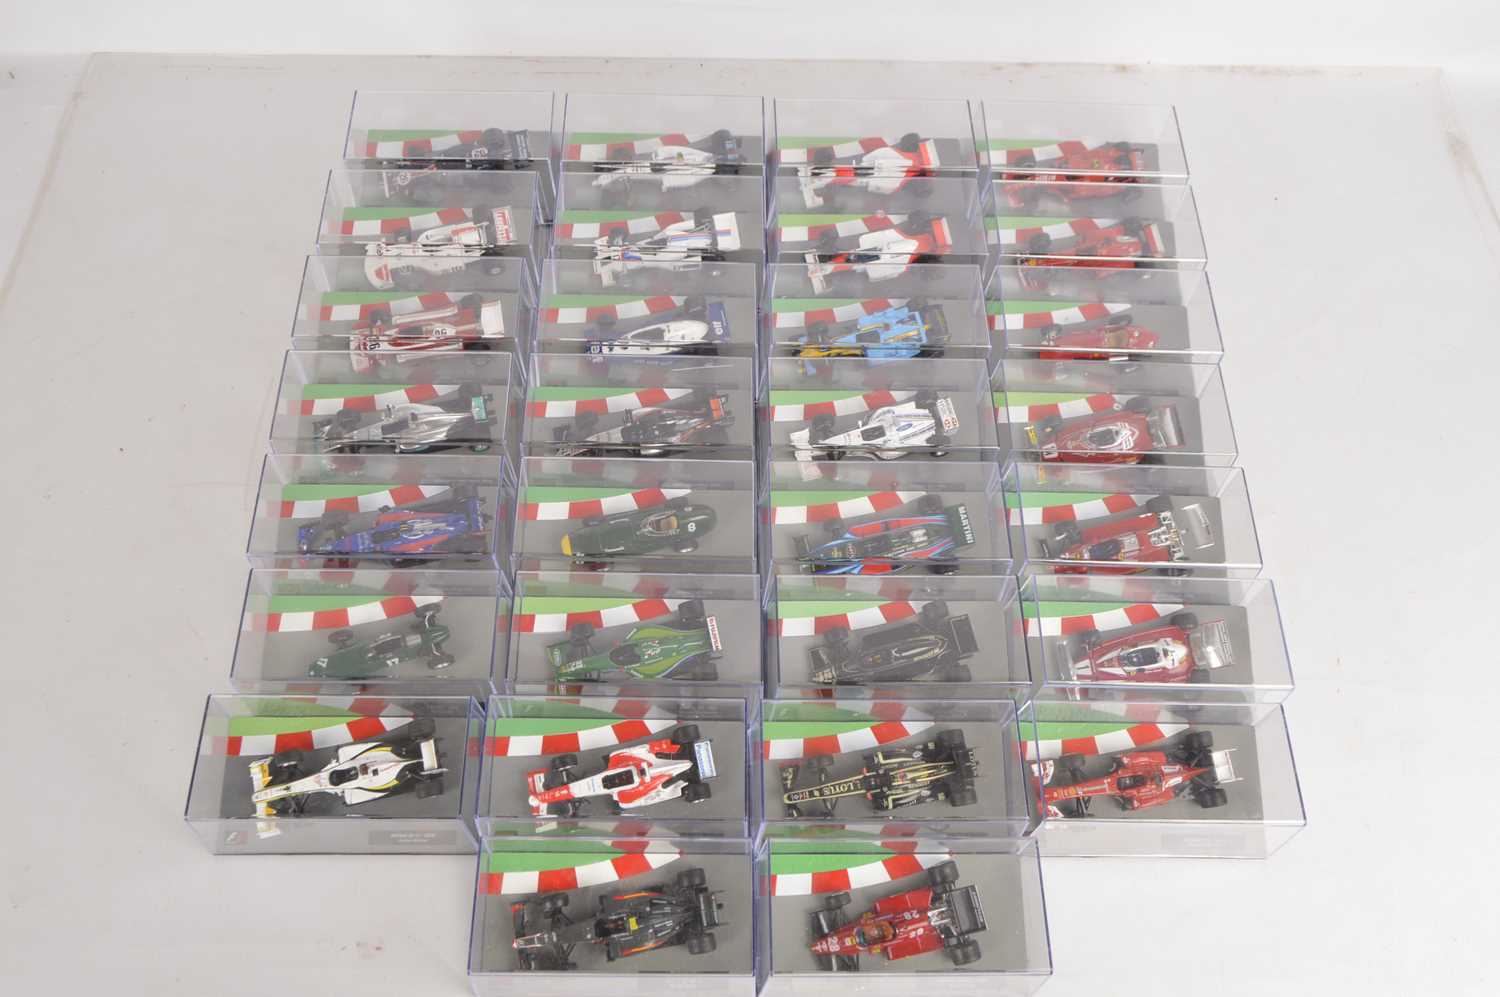 F1 Car Collection 1:43 Scale Issued by Panini (107), - Image 4 of 4